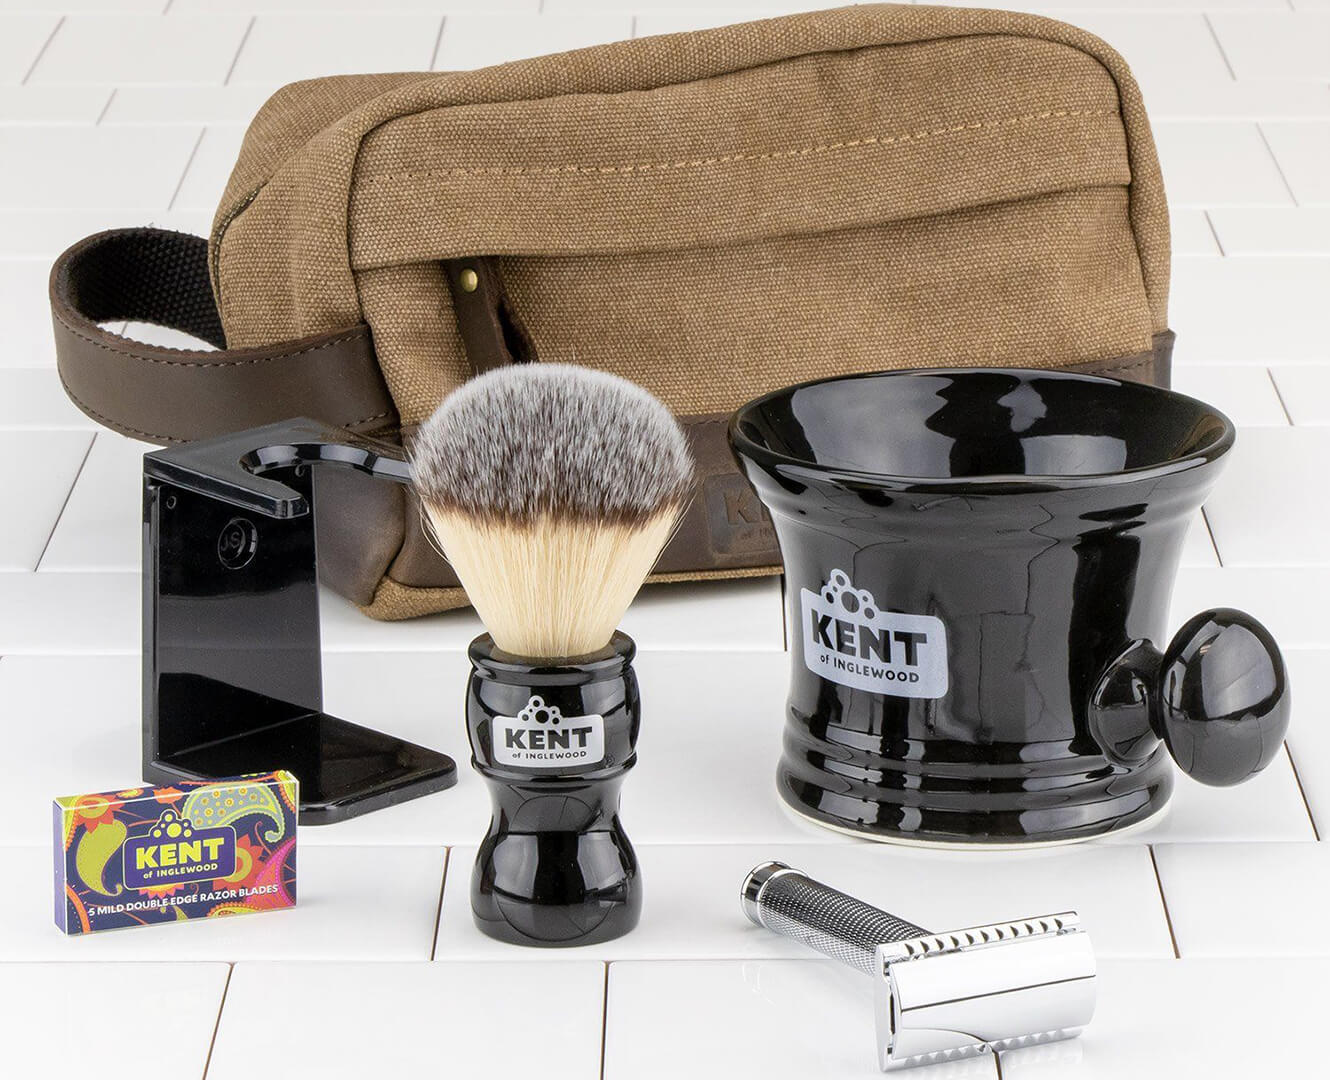 Shave kit from Kent of Inglewood